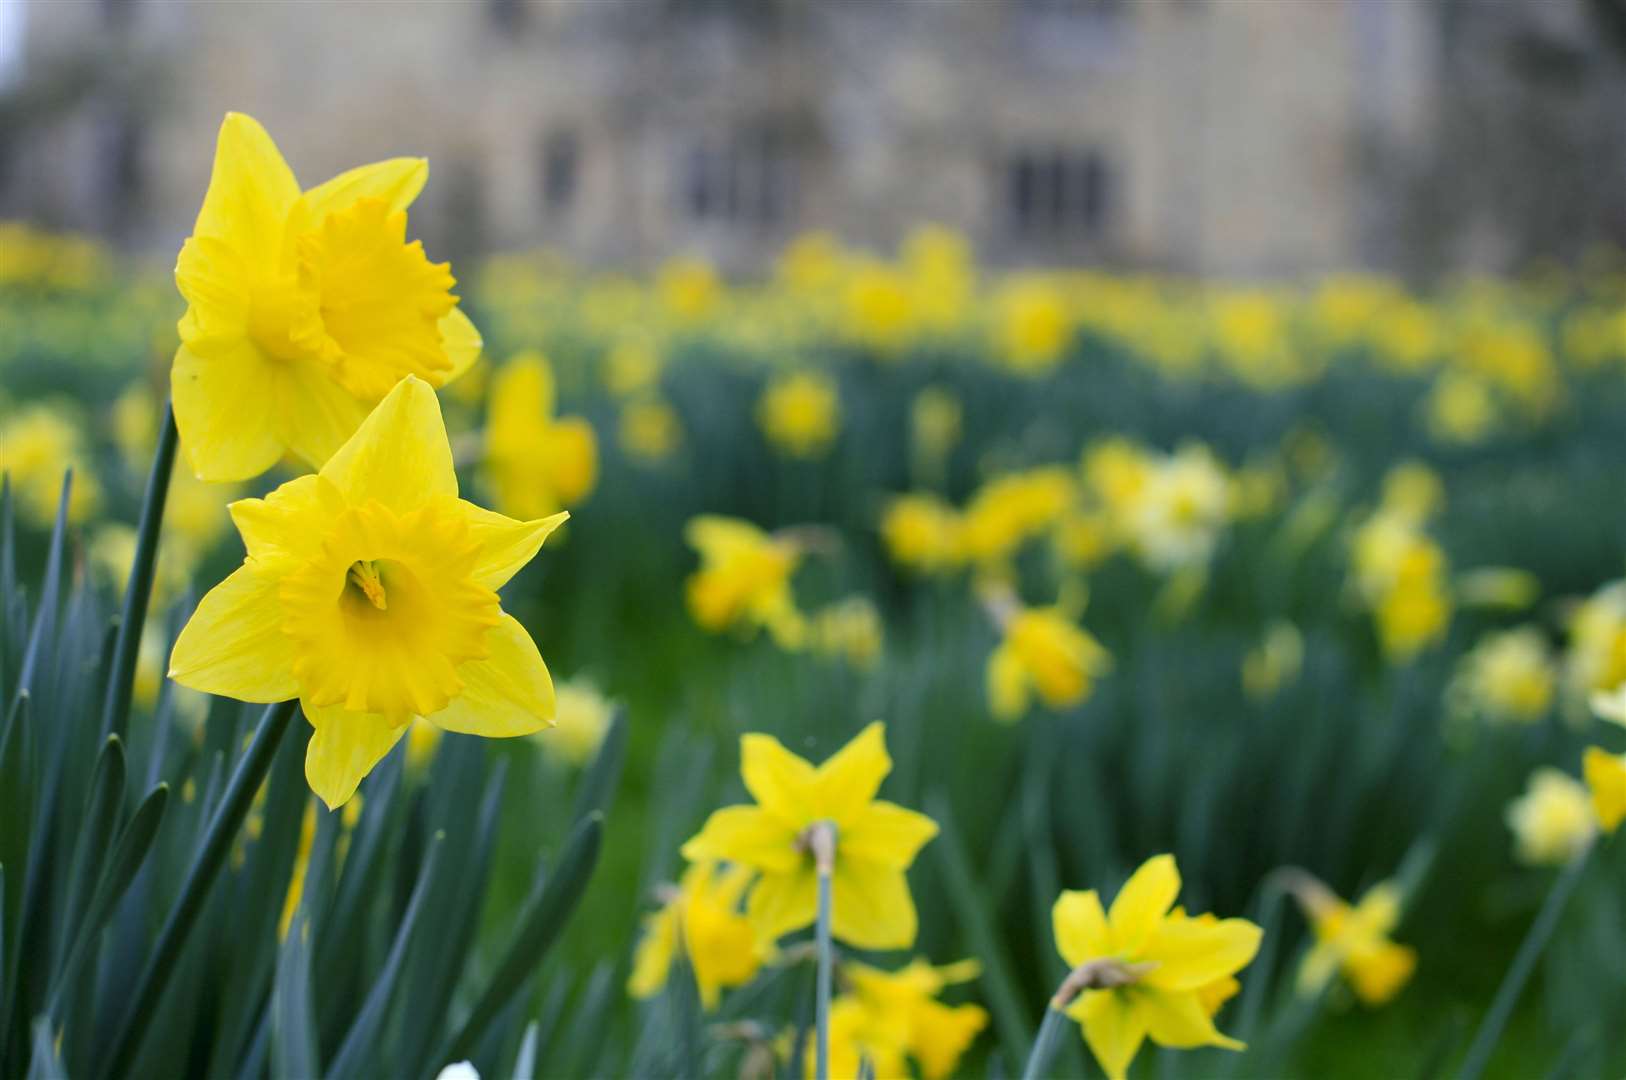 The daffodils promise to be dazzling at Hever Castle